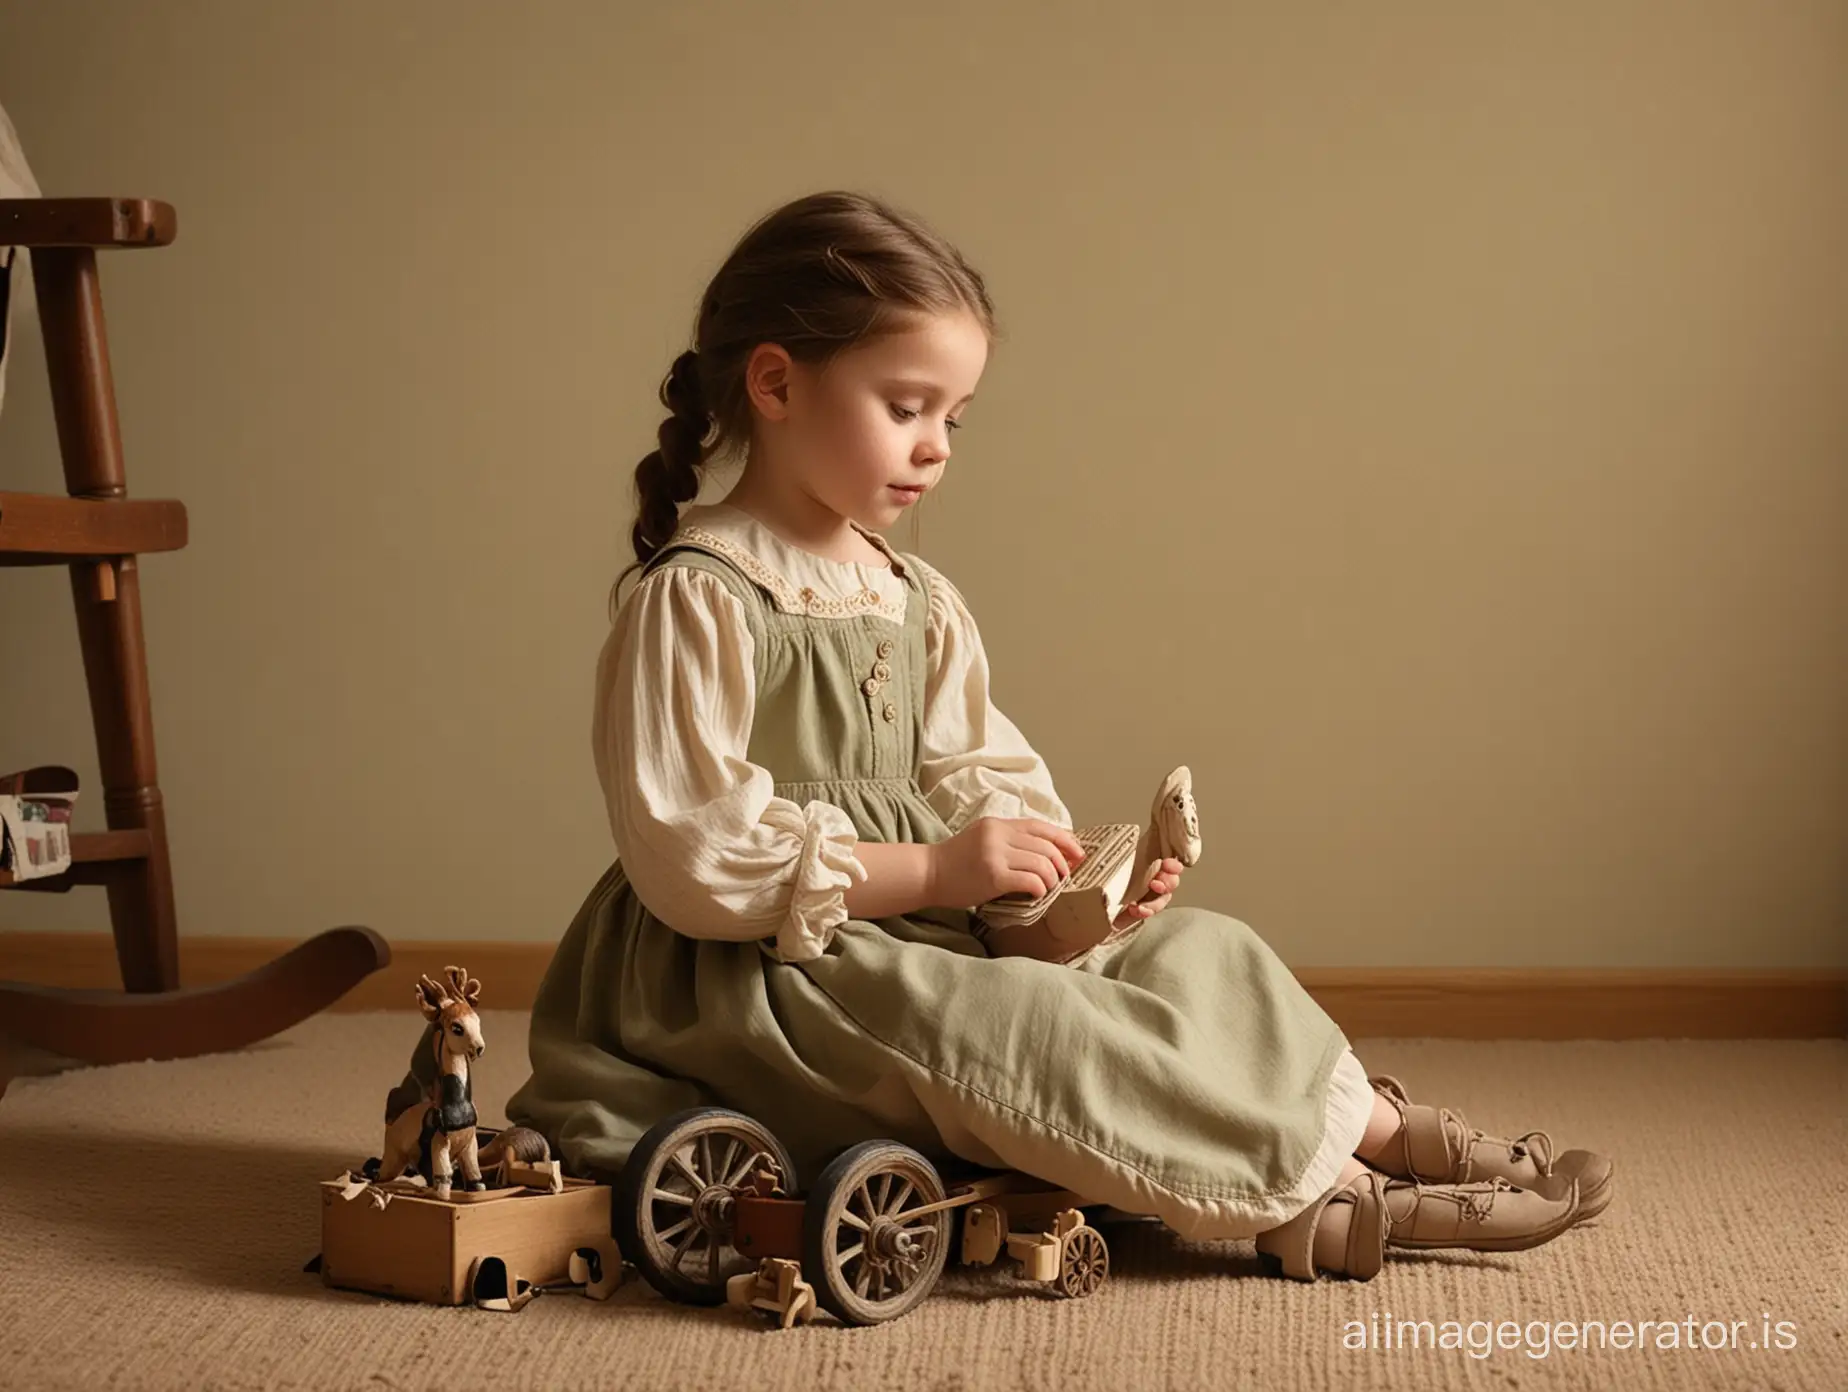 Nostalgic-Scene-Young-Girl-Playing-with-Vintage-Toys-in-Warm-Dim-Light